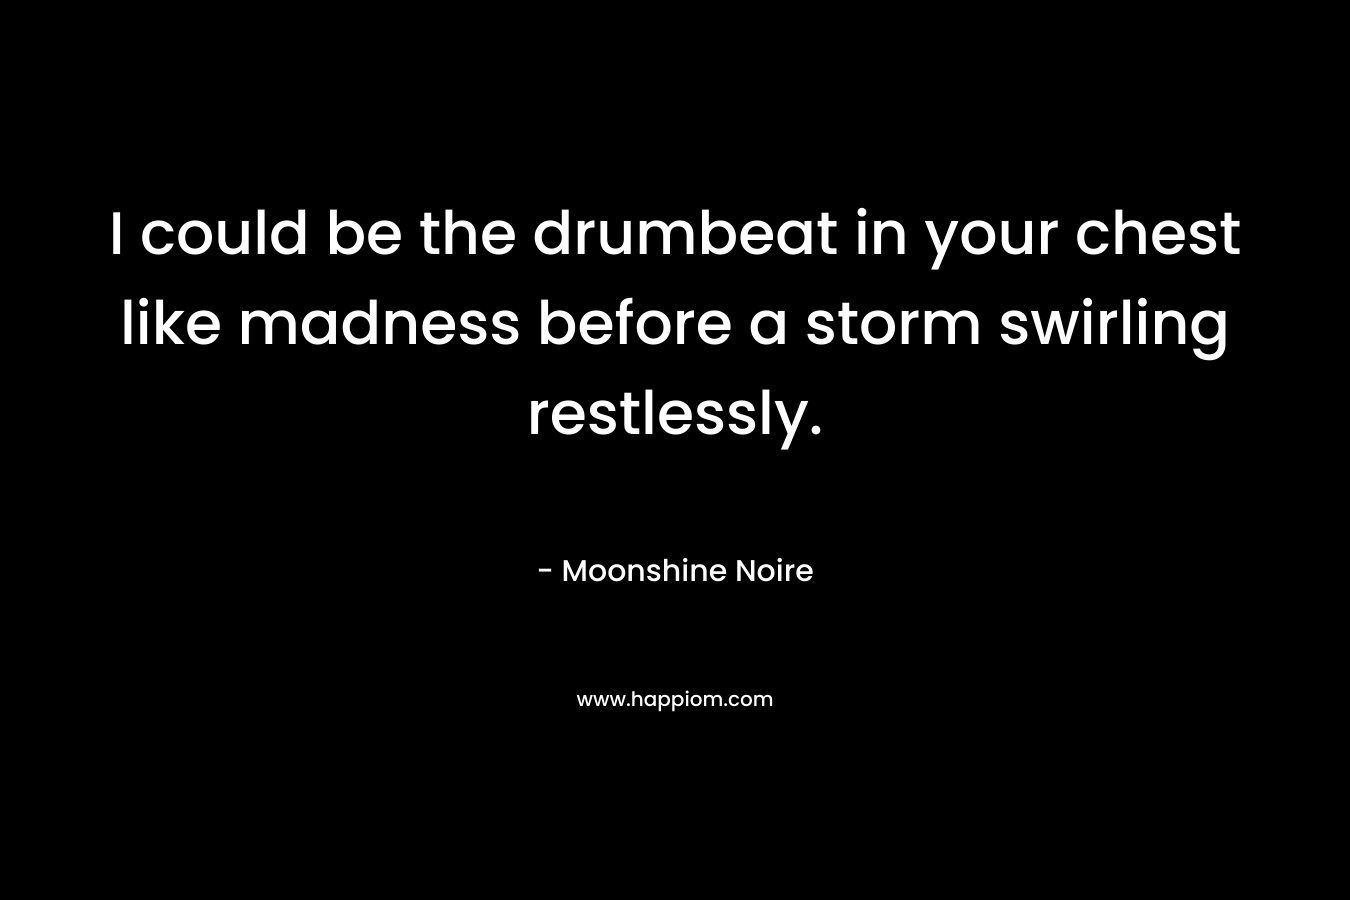 I could be the drumbeat in your chest like madness before a storm swirling restlessly. – Moonshine Noire